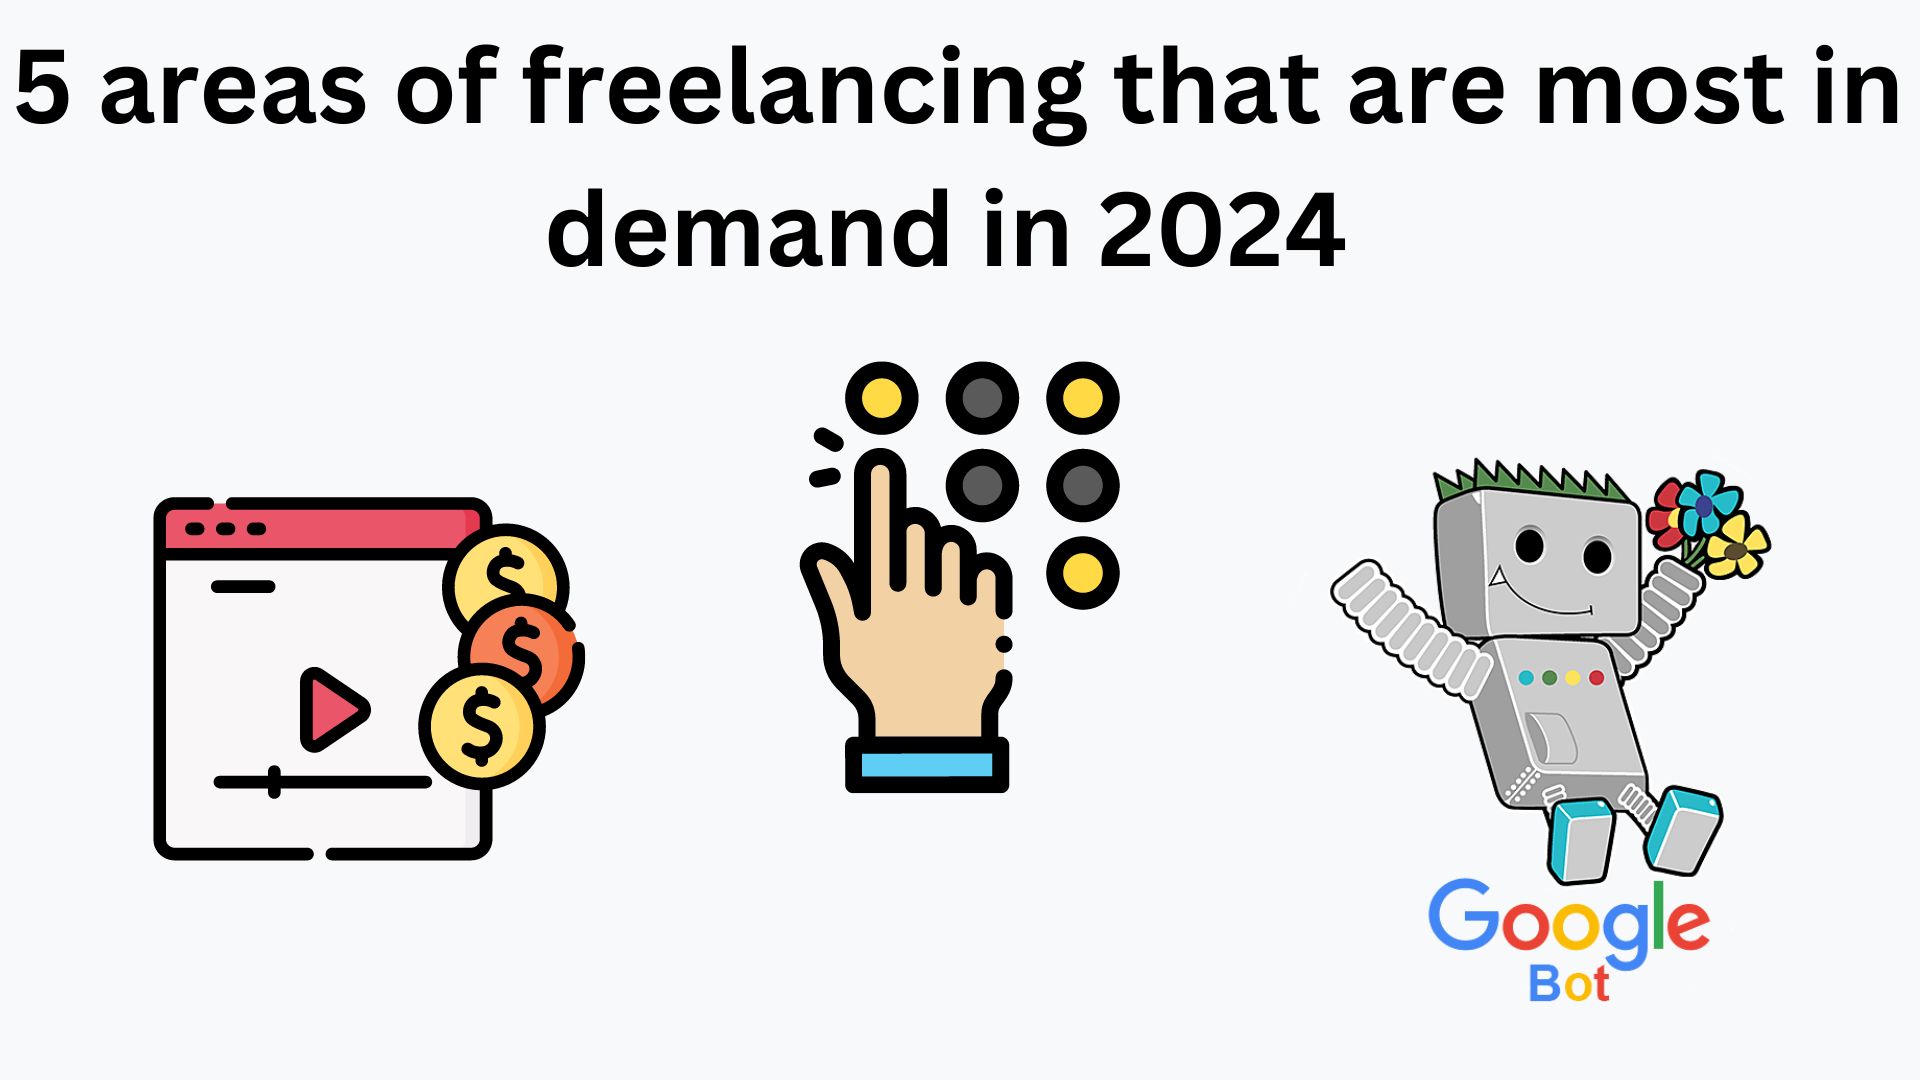  5 Areas Of Freelancing That Are Most In Demand In 2024